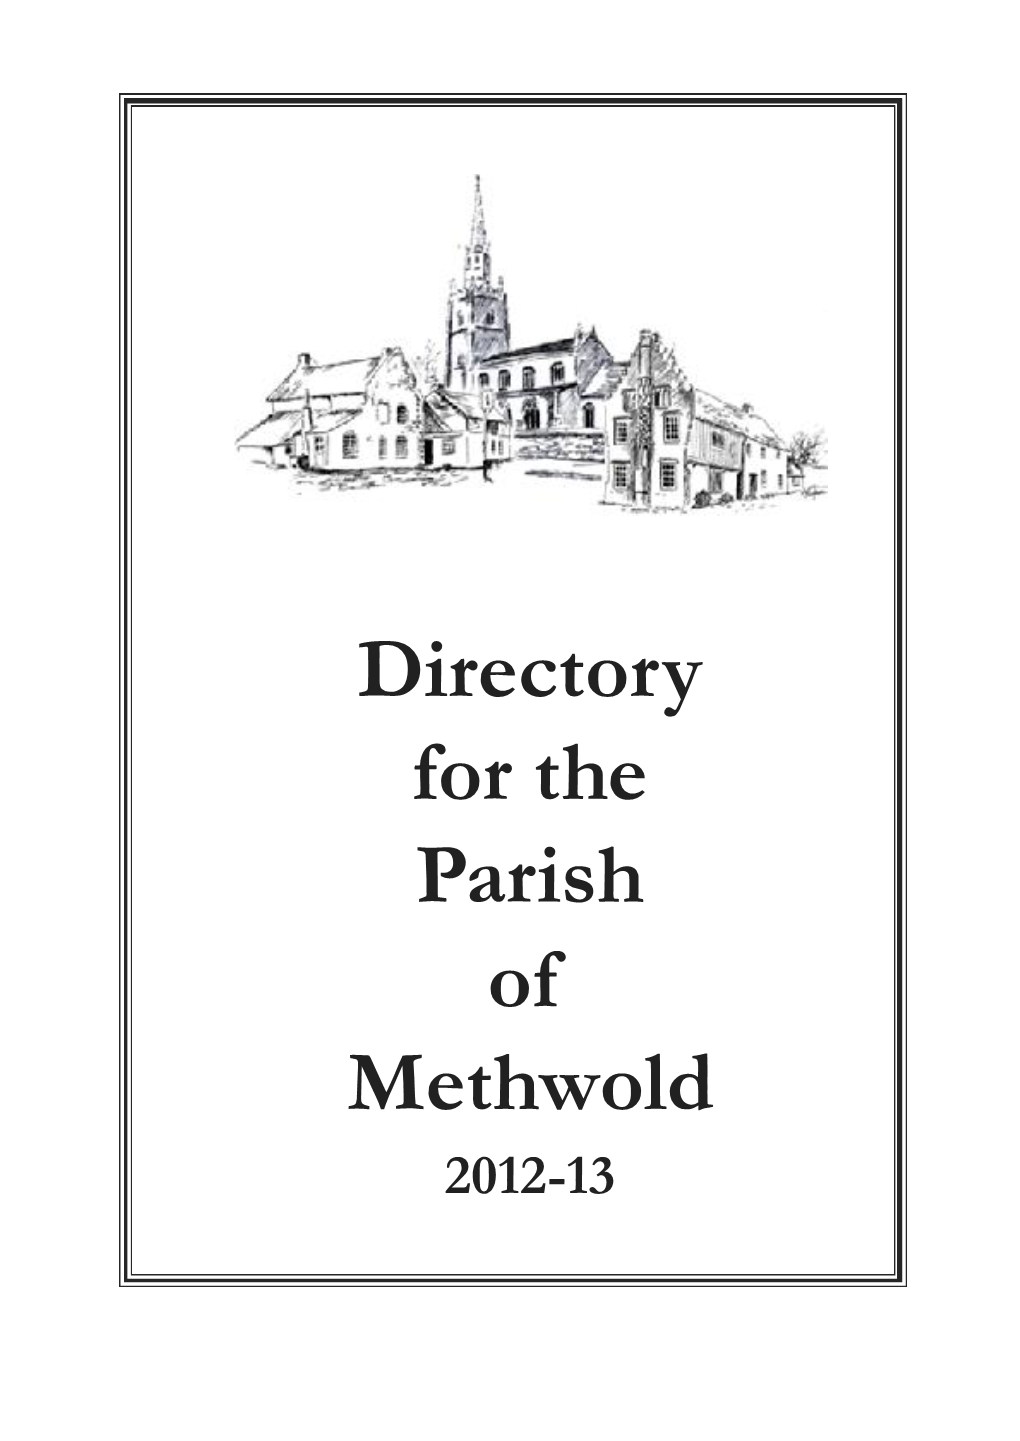 Directory for the Parish of Methwold